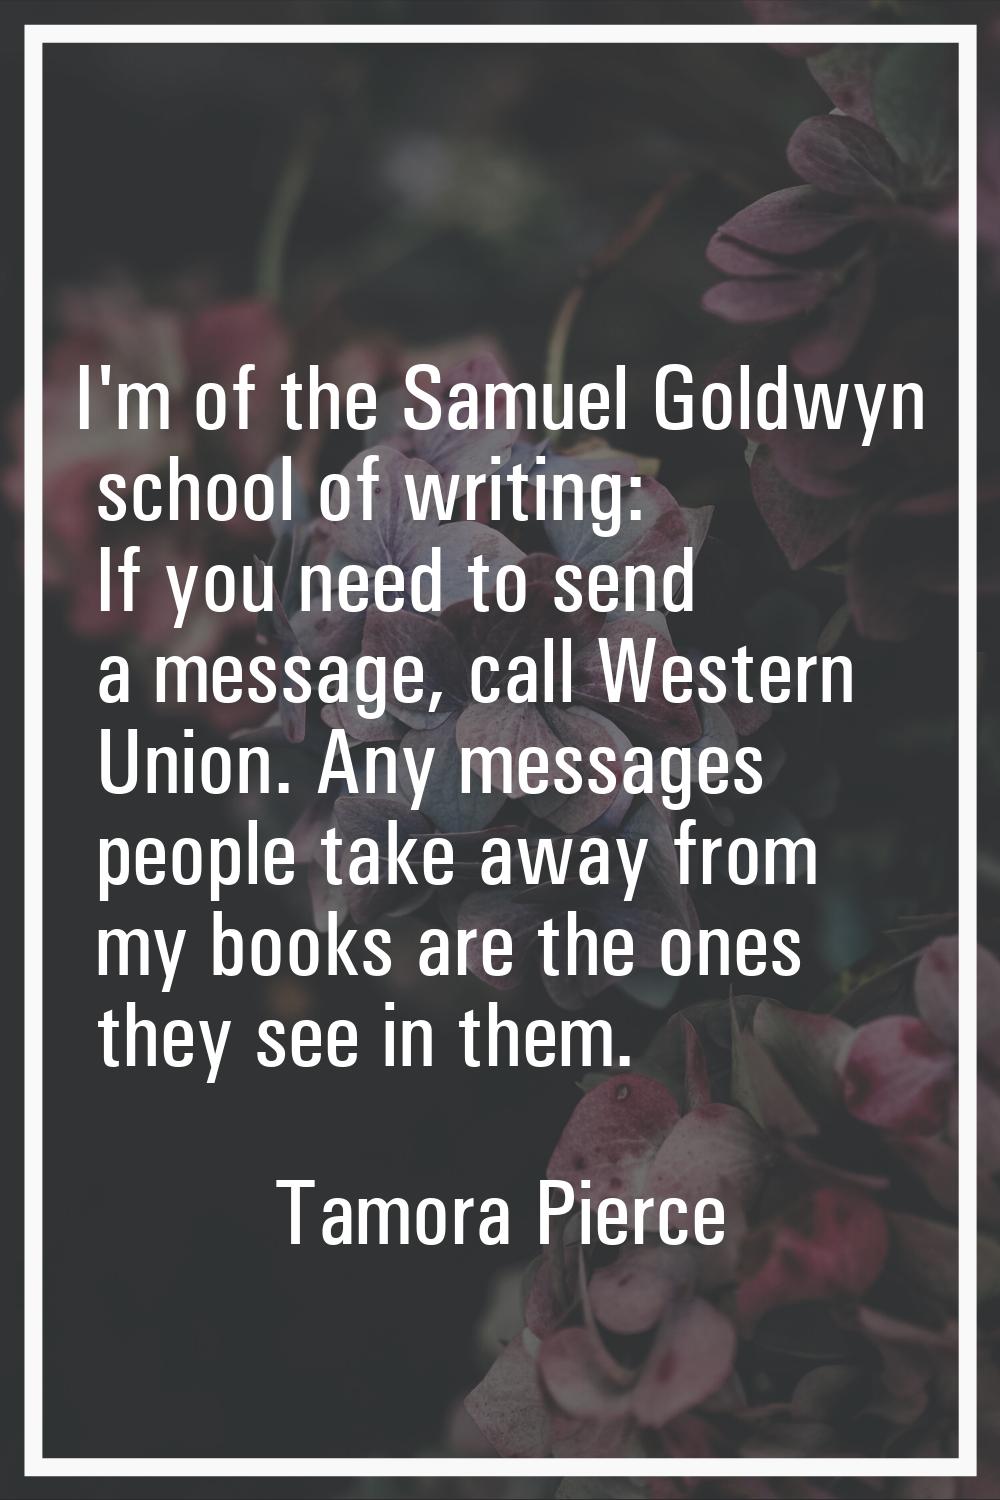 I'm of the Samuel Goldwyn school of writing: If you need to send a message, call Western Union. Any